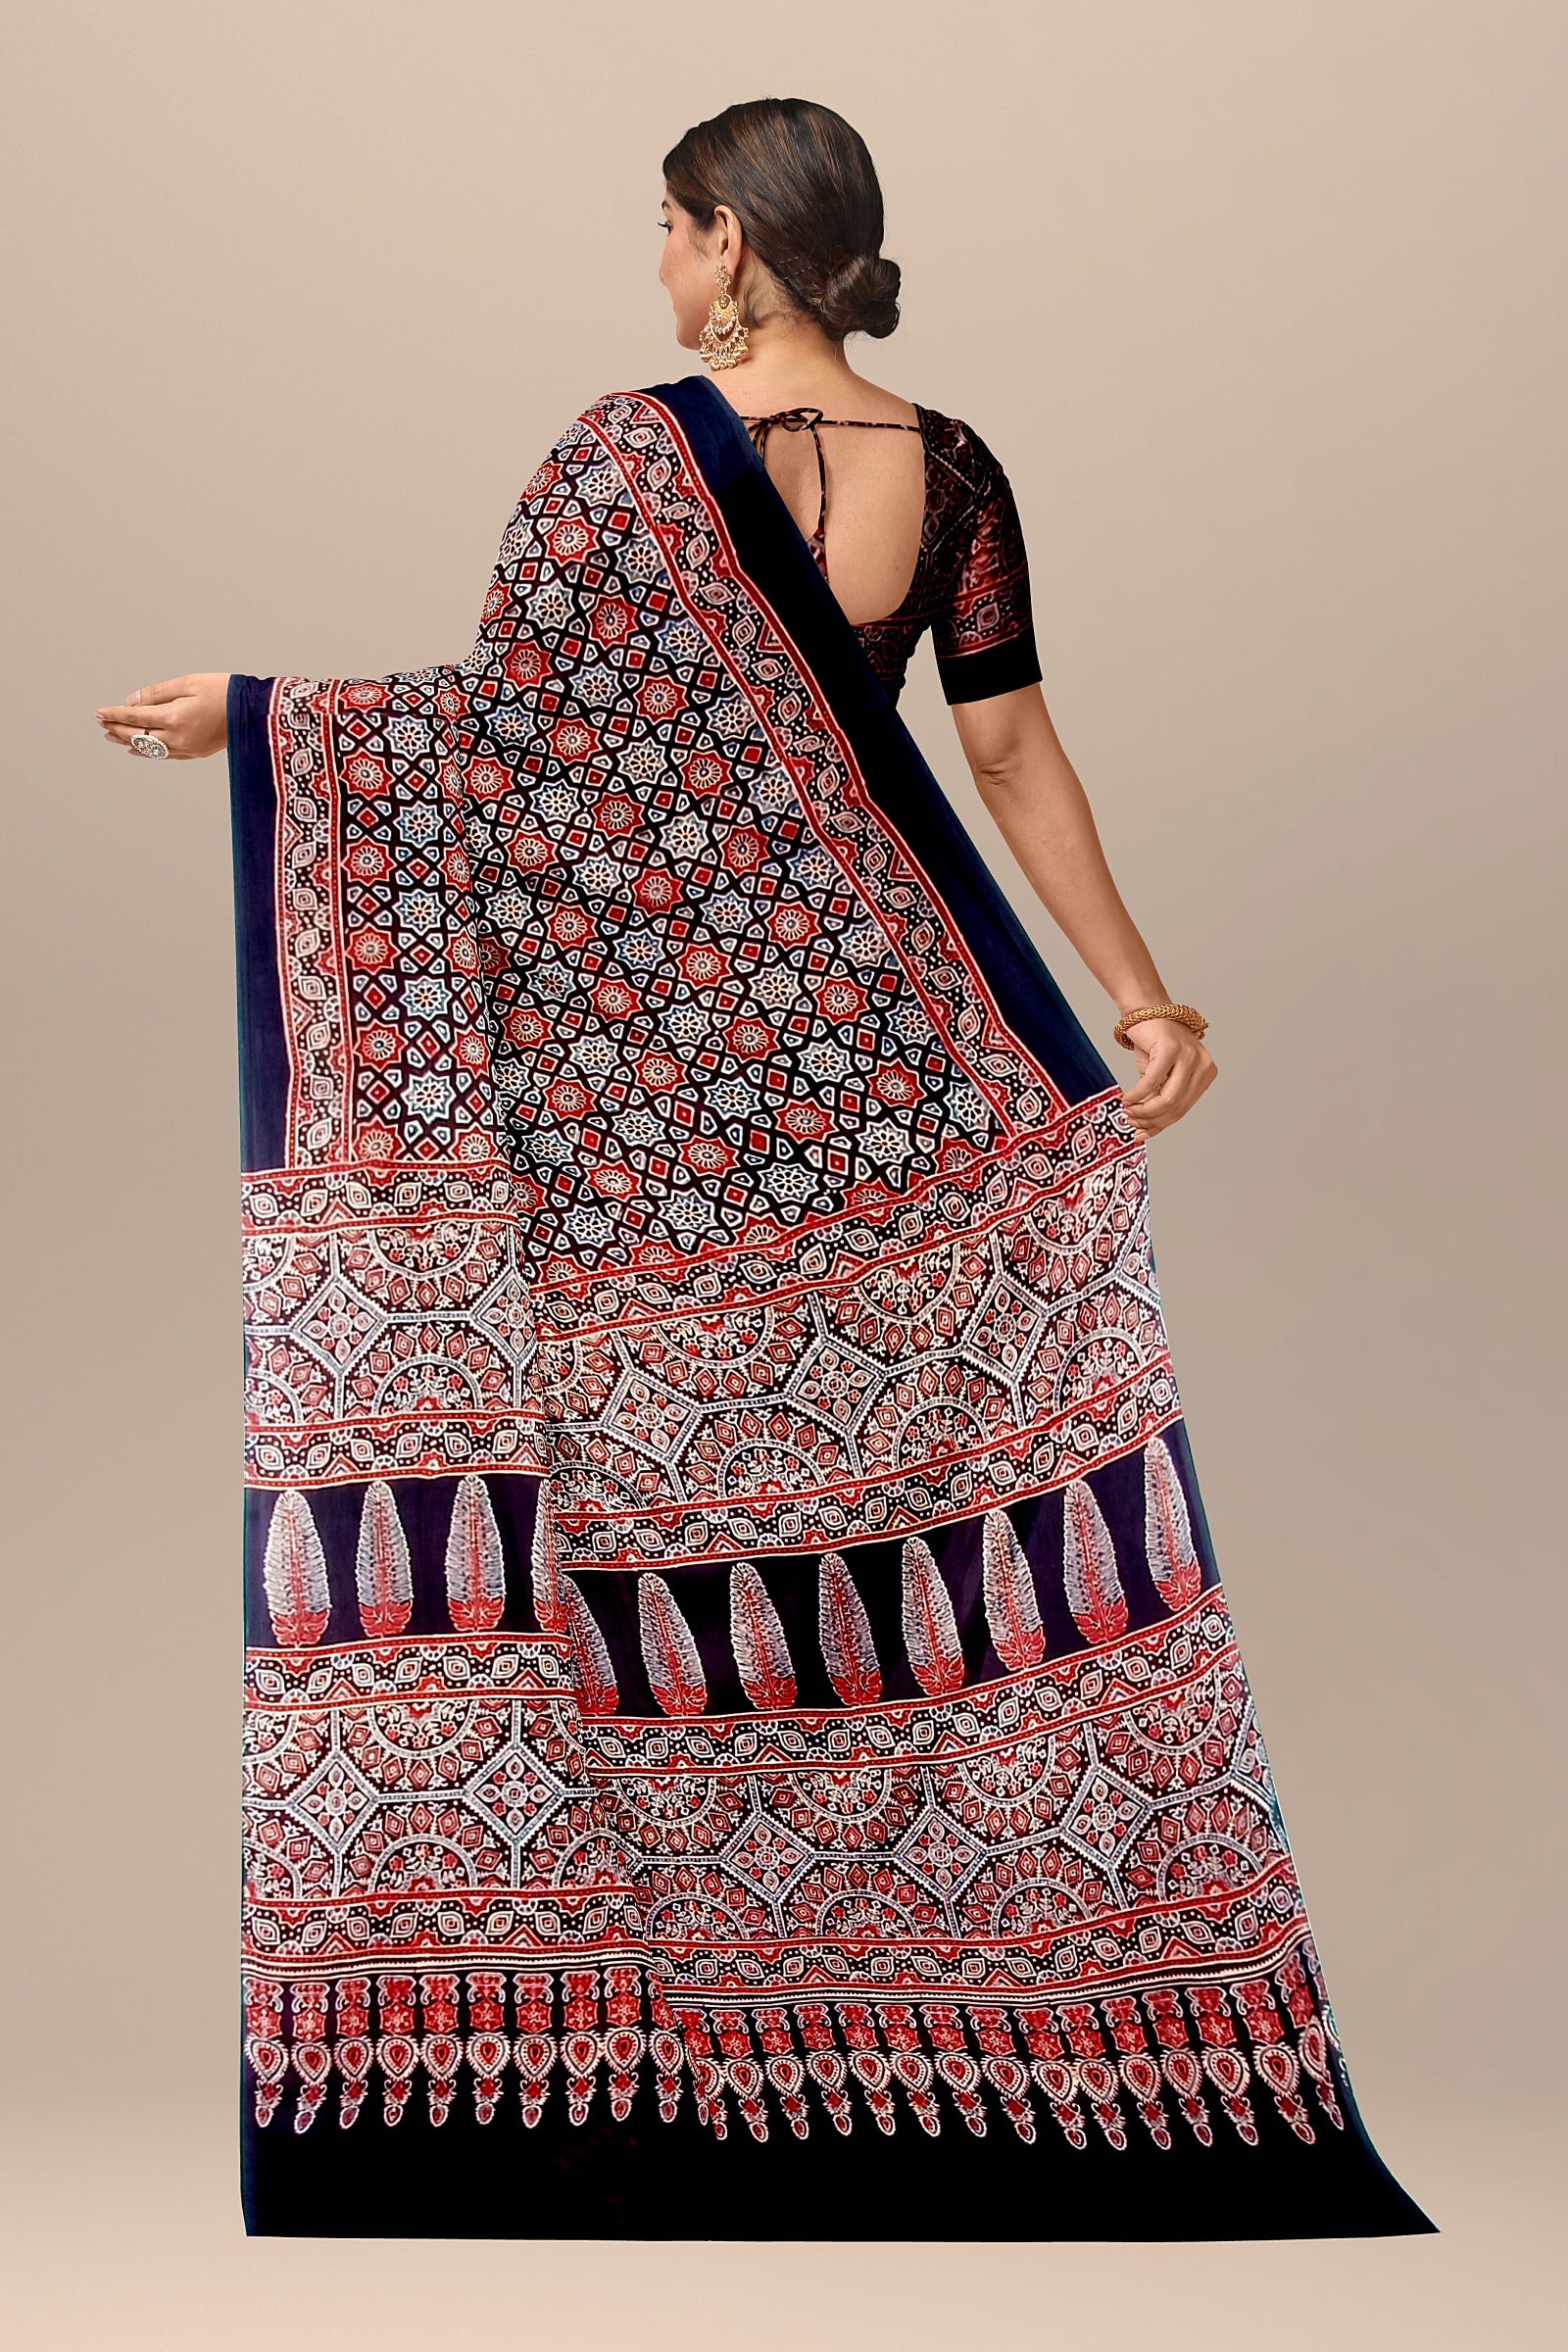 Traditional Ajrakh Hand Block Printed Black Color Modal Silk Saree with Blue and Red Floral and Geometrical Print   SKU-BS10146 - Bhartiya Shilp